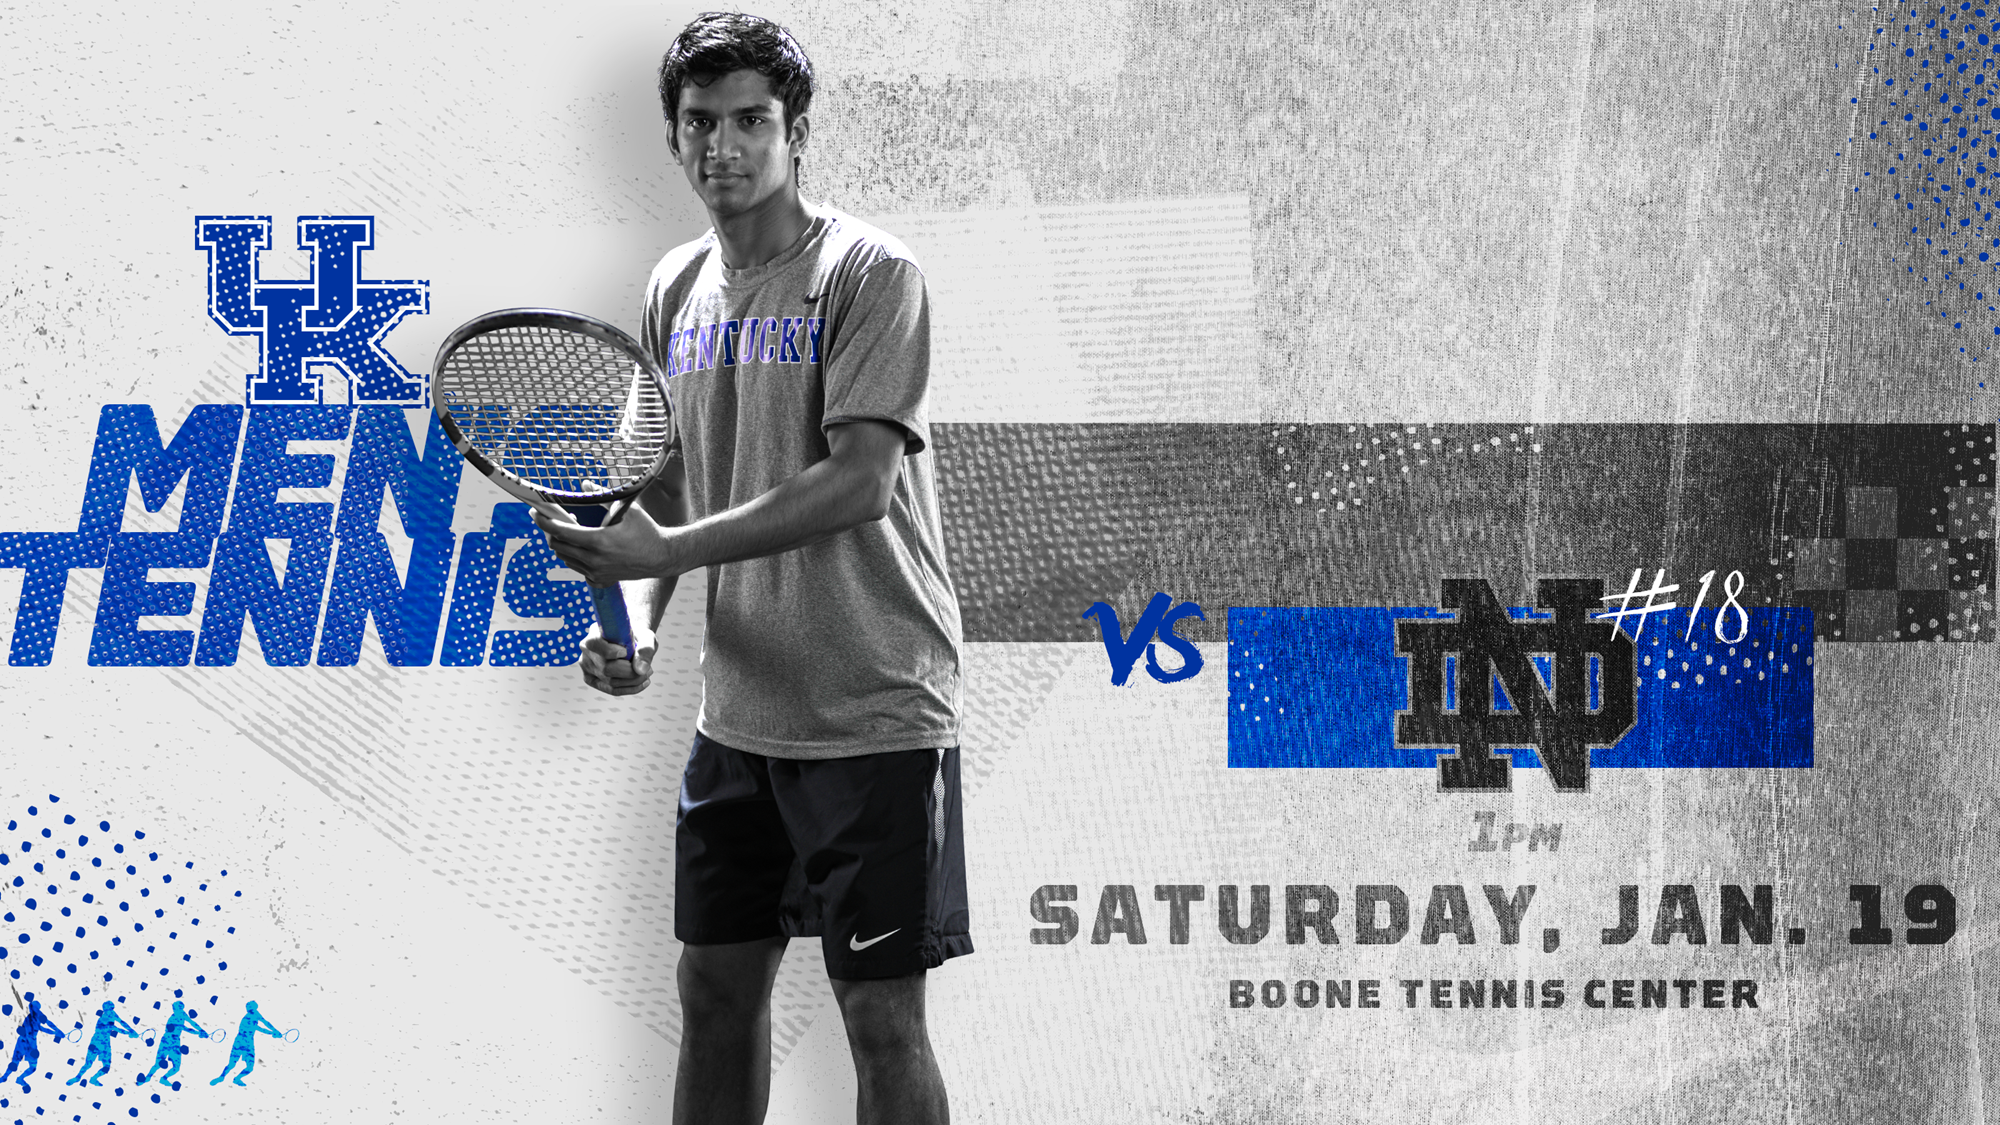 Men’s Tennis Meets First Ranked Opponent on Saturday Versus Notre Dame